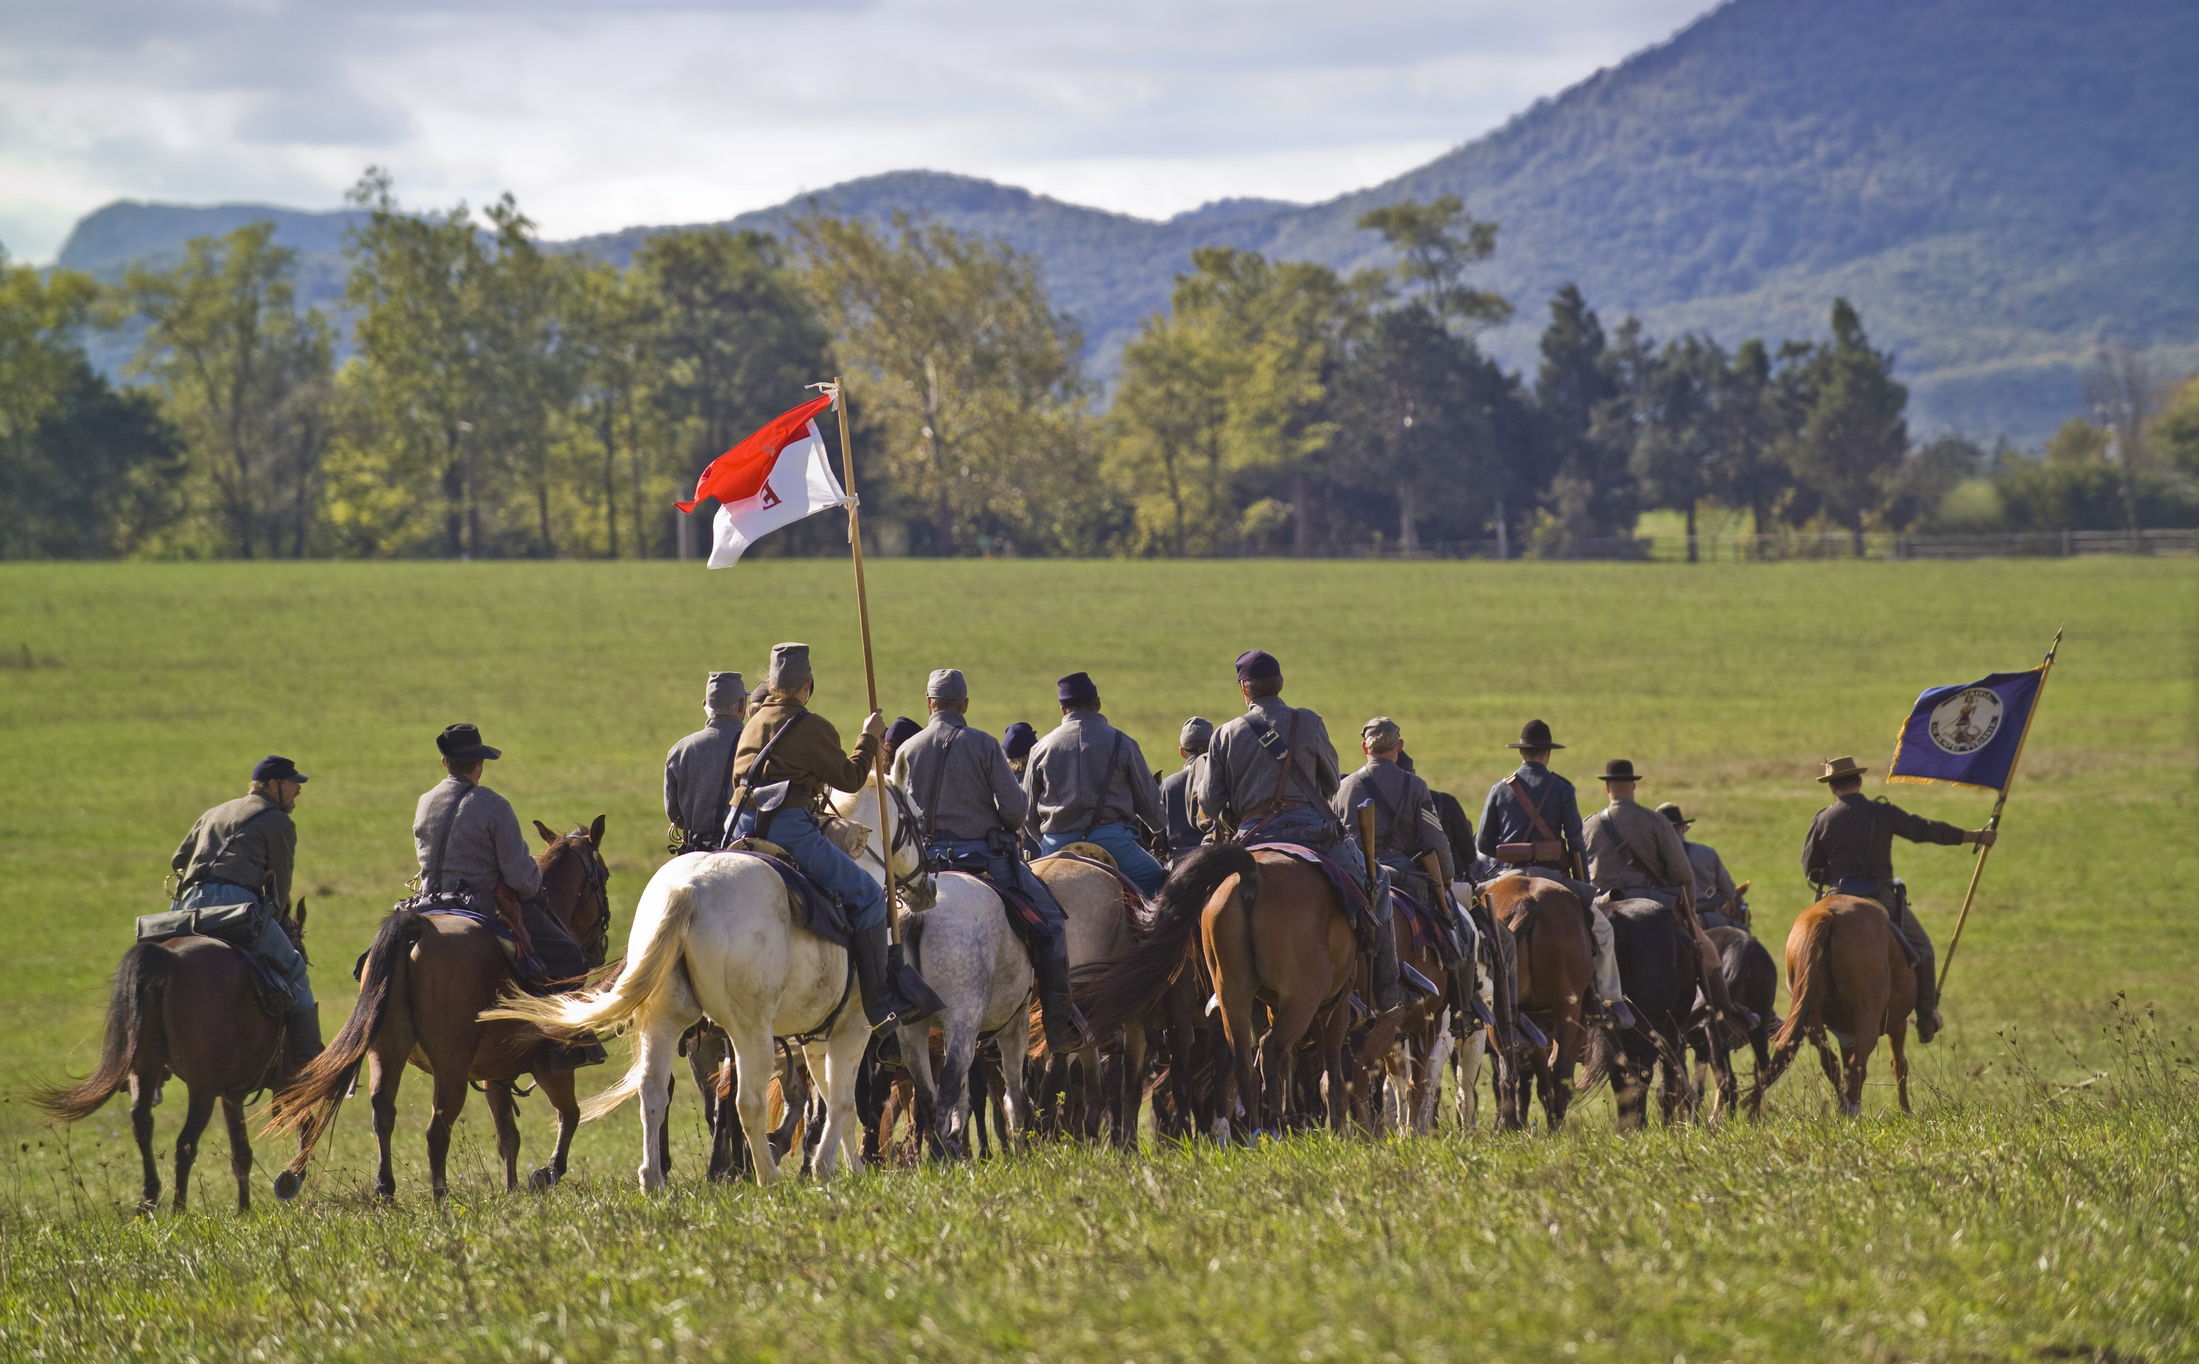 Civil War Enthusiast Pleads Guilty To Planting Bomb During Battle Reenactment